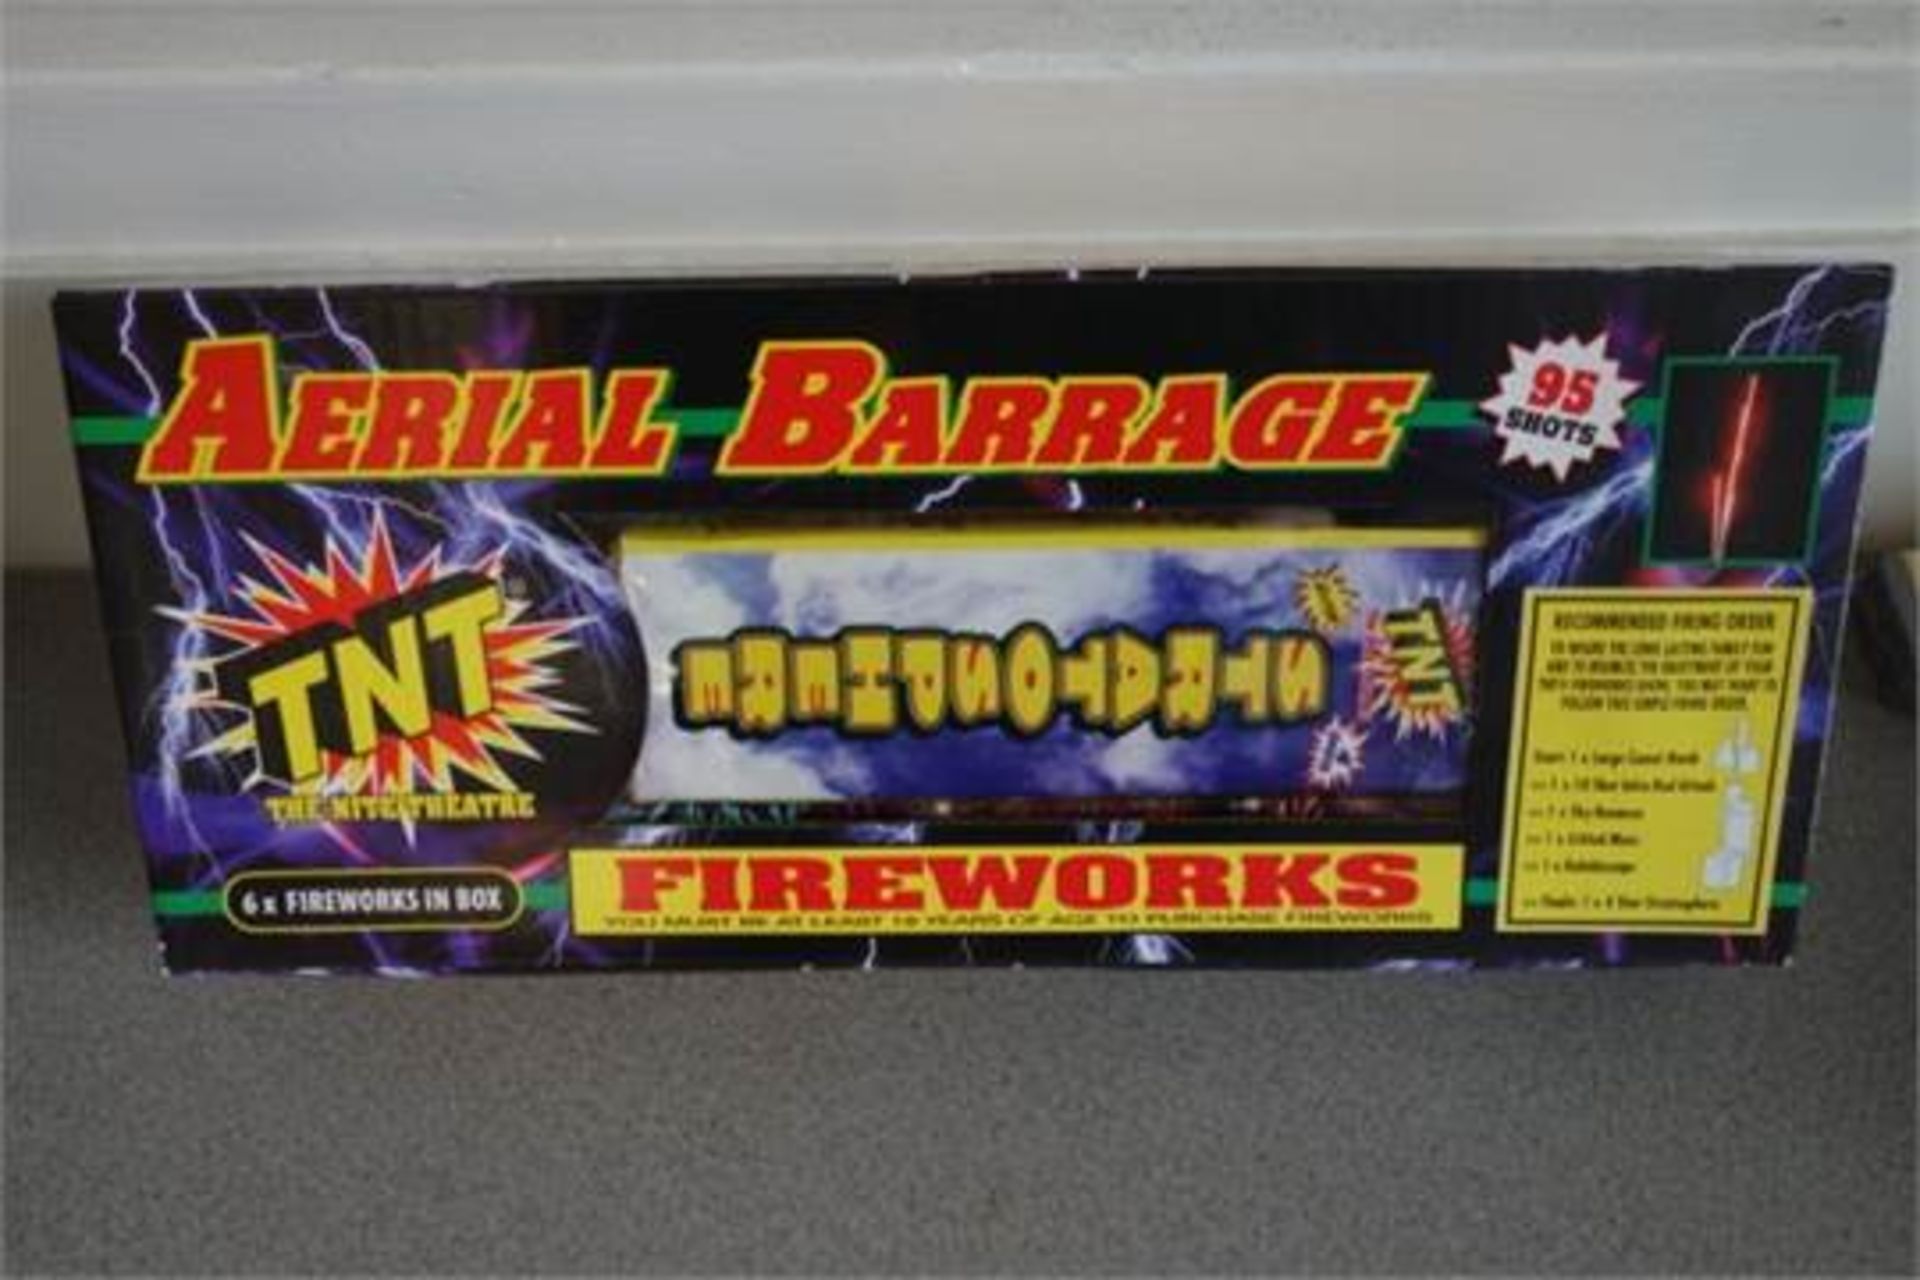 4 x TNT Fireworks - Aerial Barrage 95 Shot Selection Box. Includes 6 high quality fireworks. 1 x